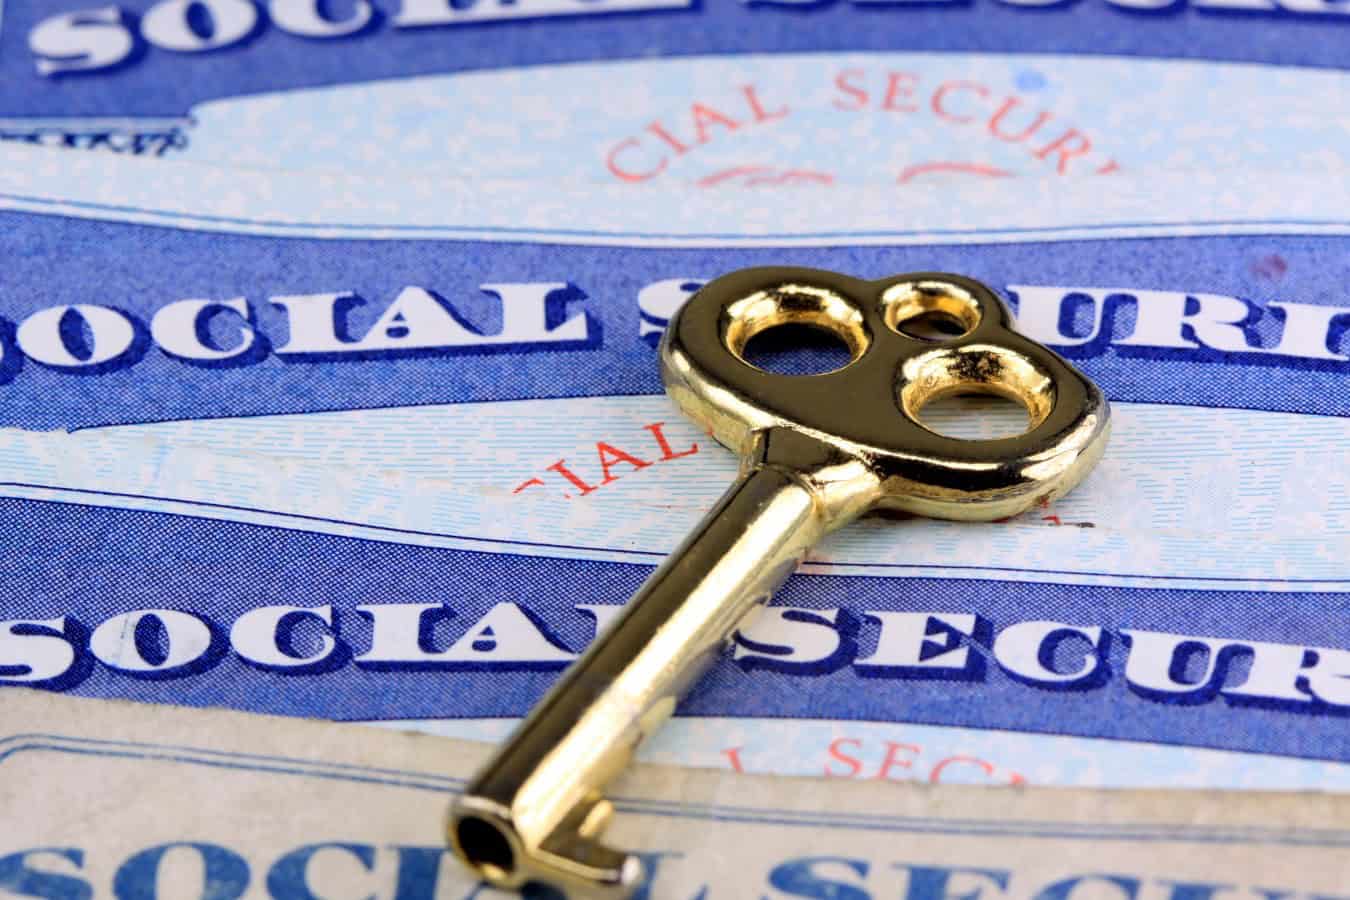 Social Security Cards with Key To The Golden Years of Retirement